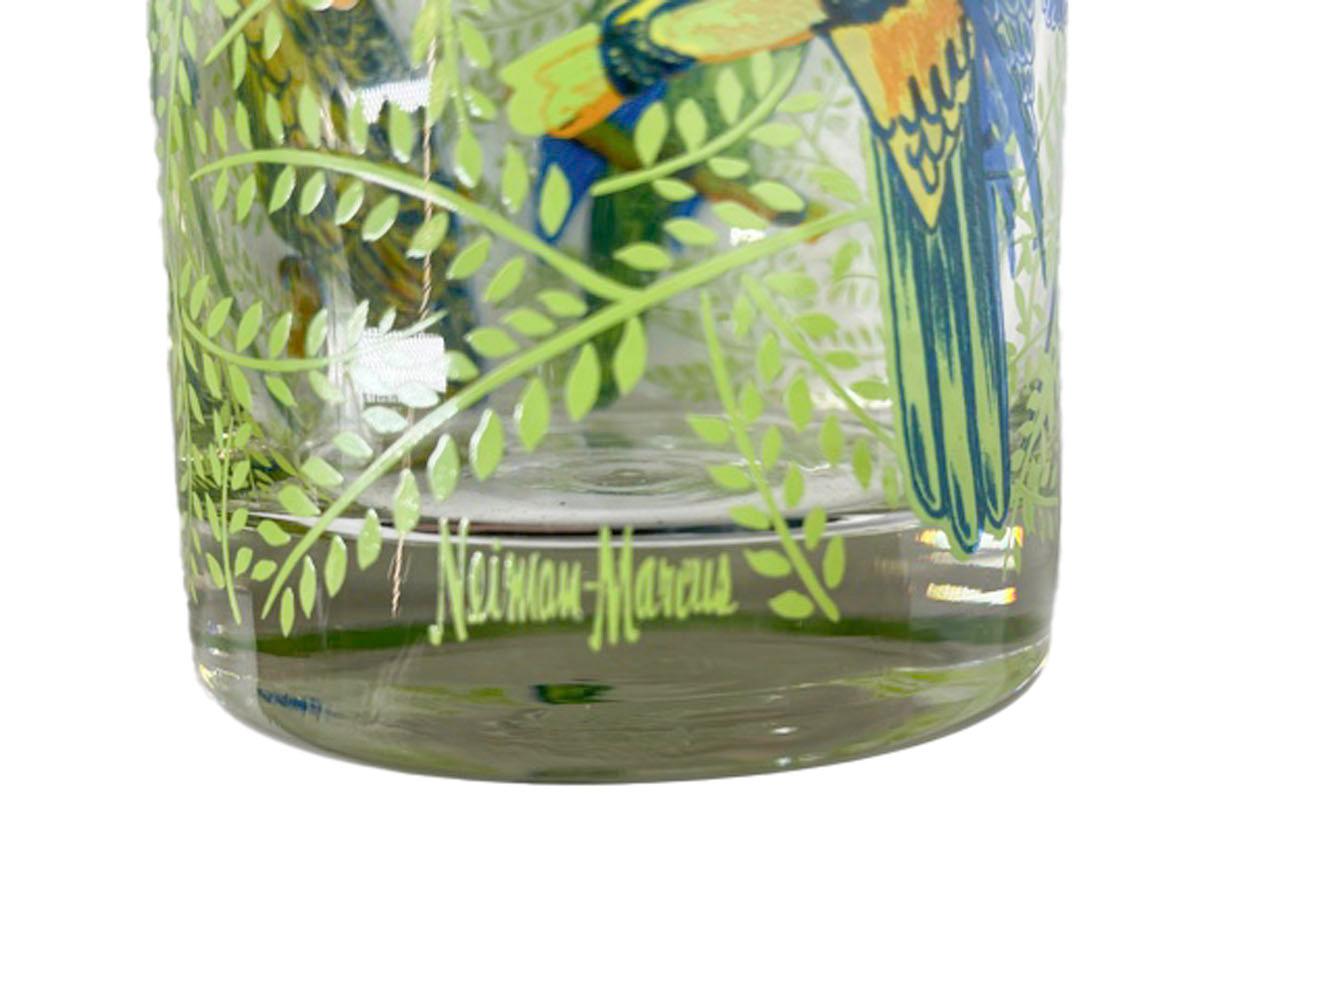 Four large vintage rocks glasses with brightly colored parrots sitting among leafy branched. Private labeled for Neiman Marcus and likely made by Cera Glass.